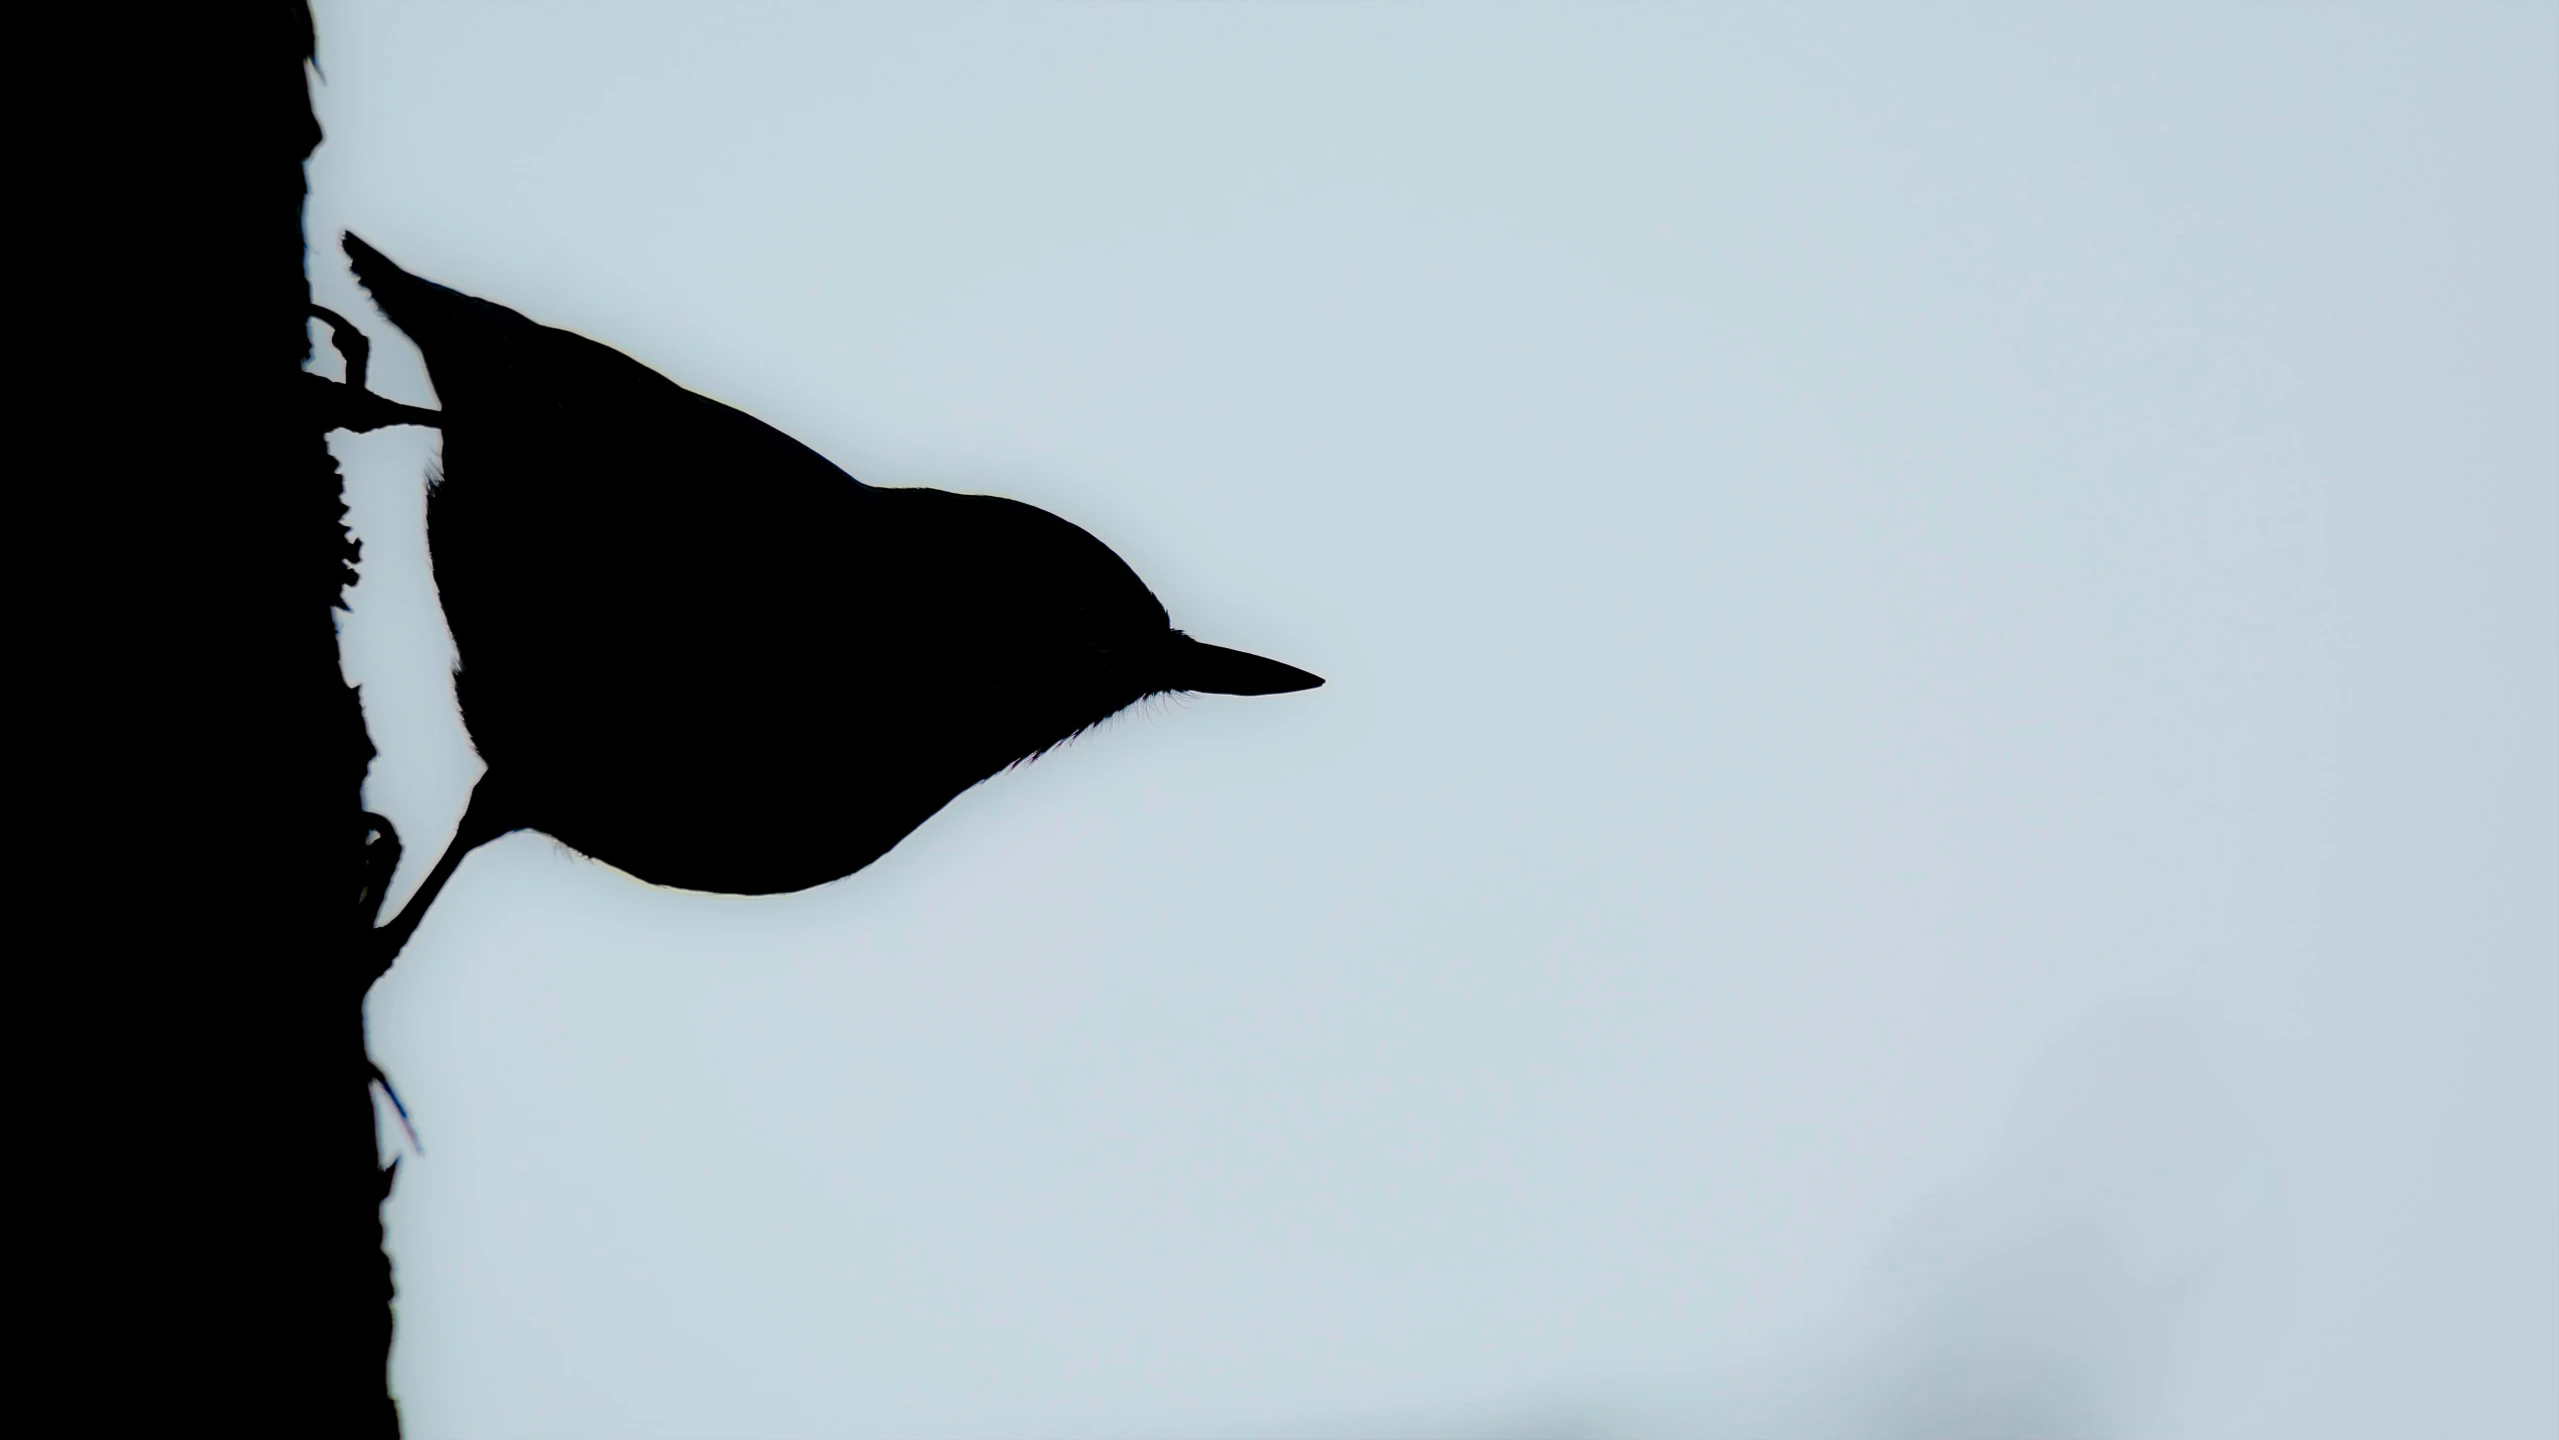 a silhouette of a bird with wings spread over the head